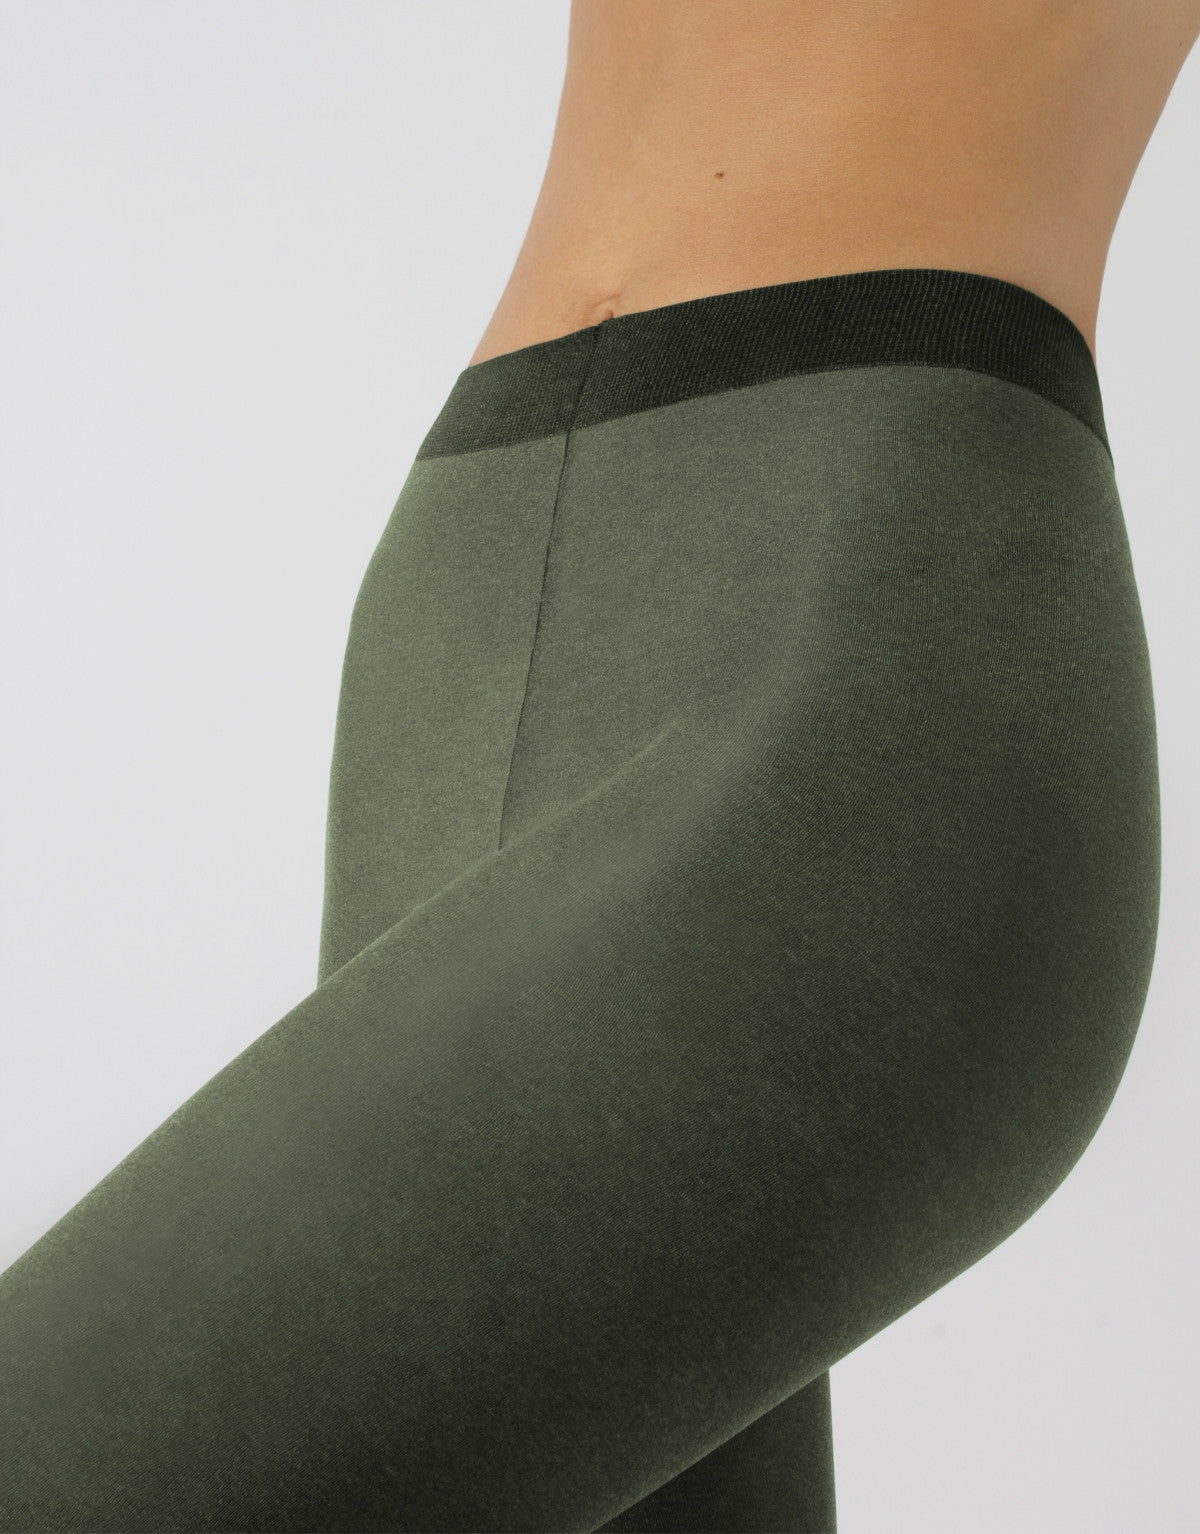 Calzitaly Melange Seam Tights - Dark bottle green opaque fashion tights with a knitted fleck effect, white back seam.